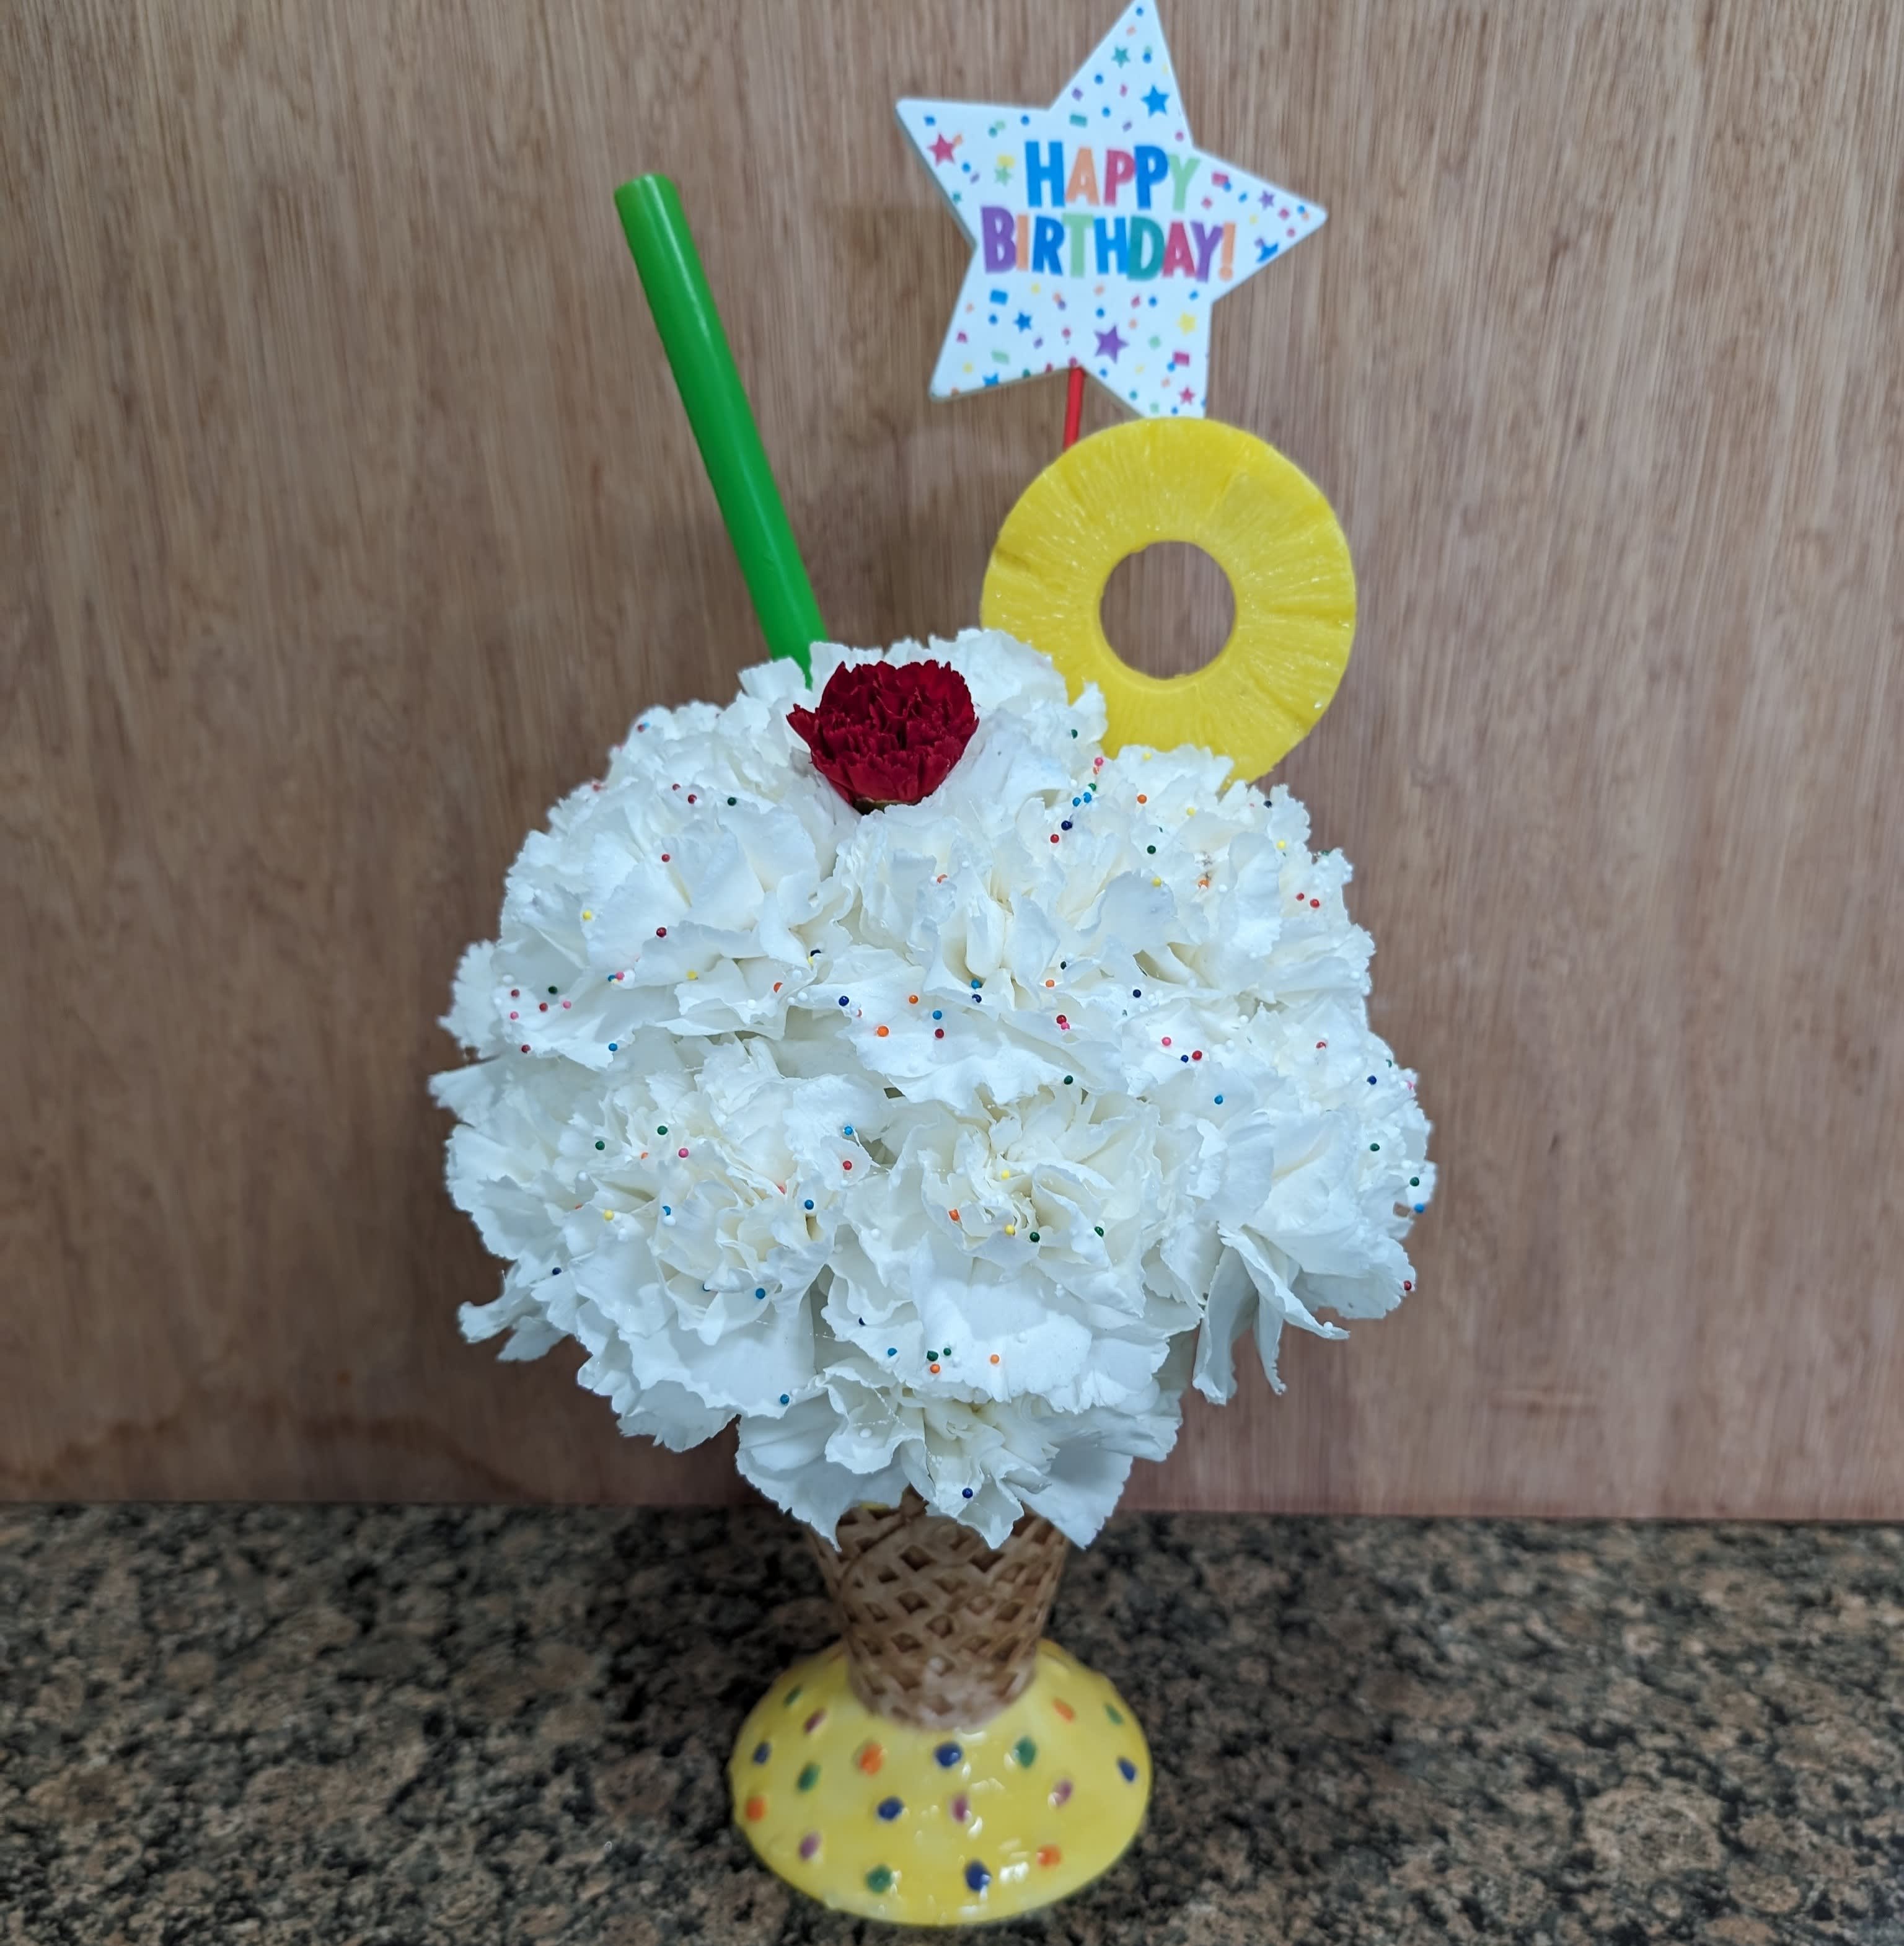 Flower cone sunday Arrangement - How festive is this?!? White carnations make up the ice cream arranged in a ceramic ice cream waffle cone. Adorned with a faux pineapple slice, sprinkles (or jimmies) straw and birthday card holder pick. This is sure to start the festivities off right.